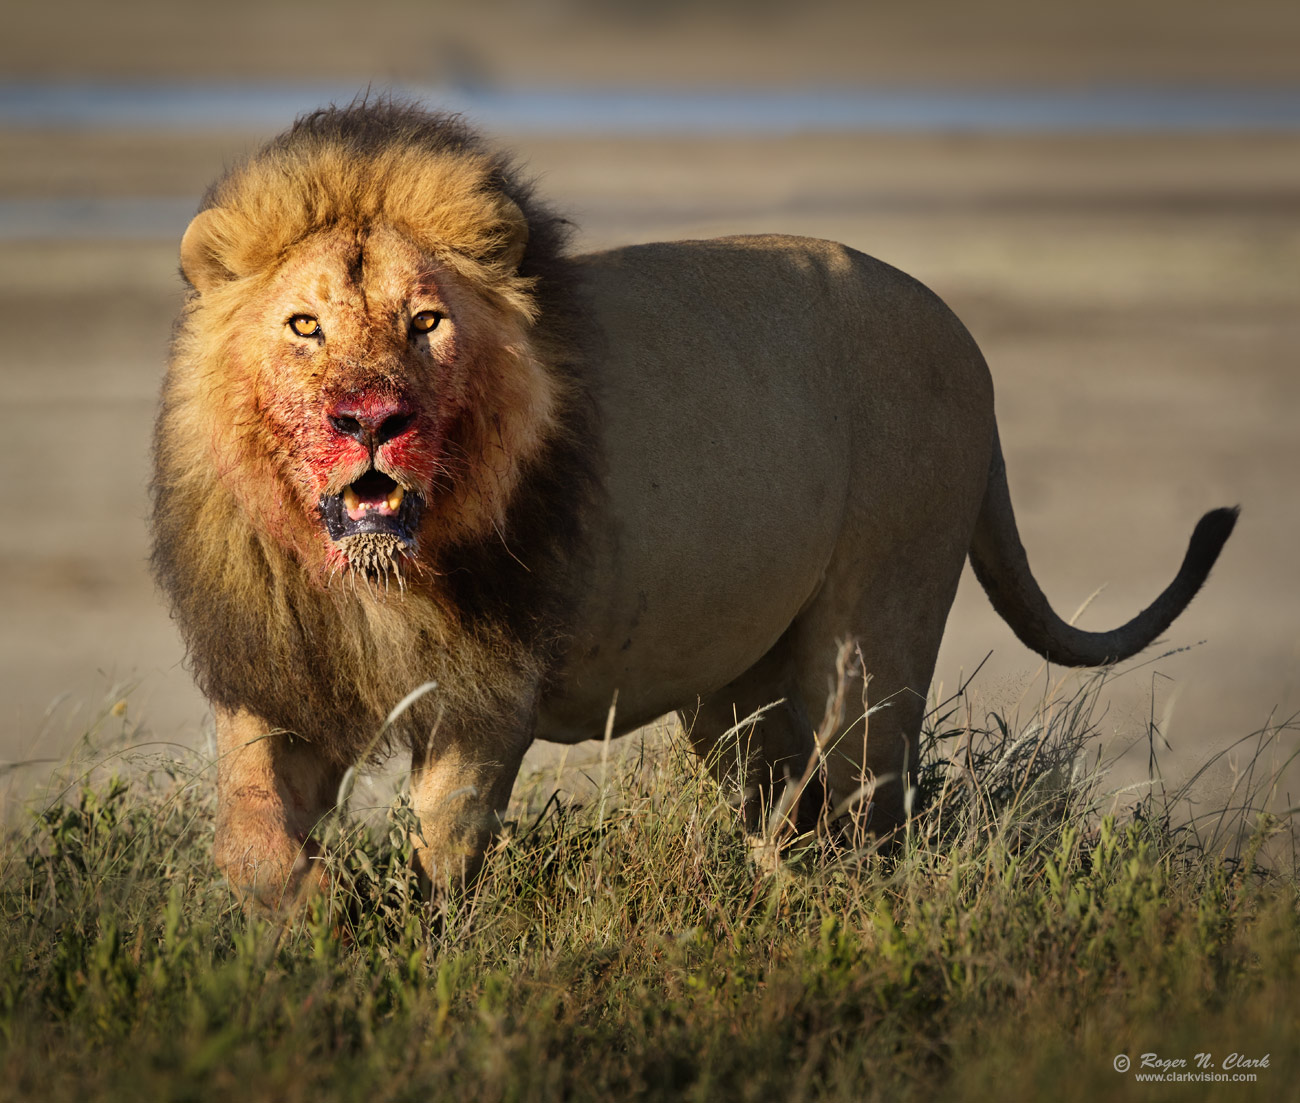 image lion.male.c02.15.2018.0J6A1732+27.g-1300s.jpg is Copyrighted by Roger N. Clark, www.clarkvision.com